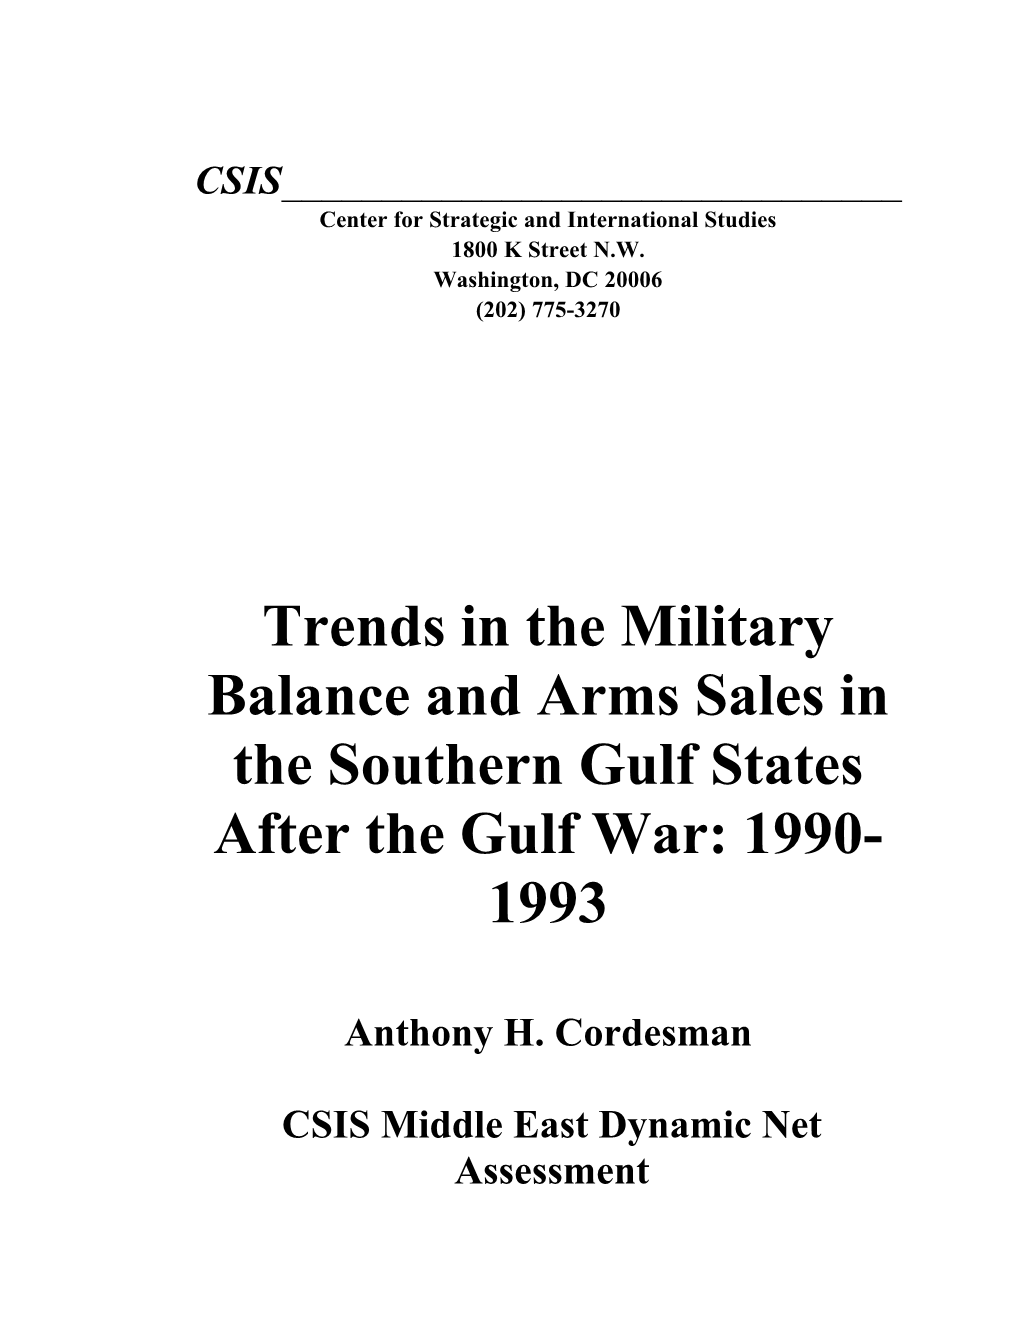 Trends in the Military Balance and Arms Sales in the Southern Gulf States After the Gulf War: 1990- 1993